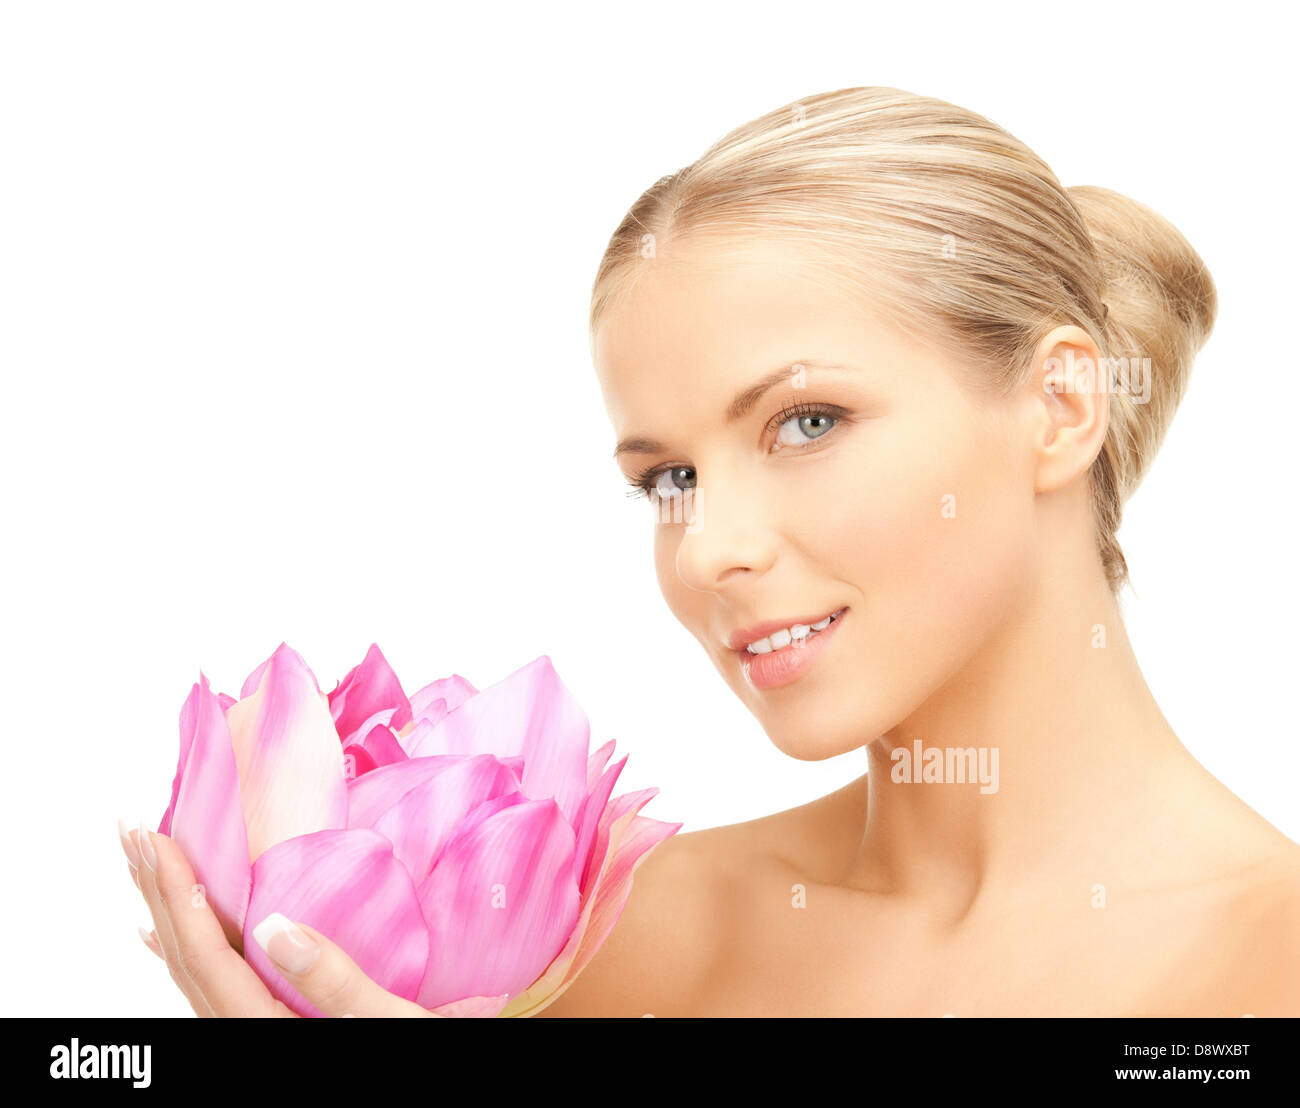 lovely woman with lotos flower Stock Photo